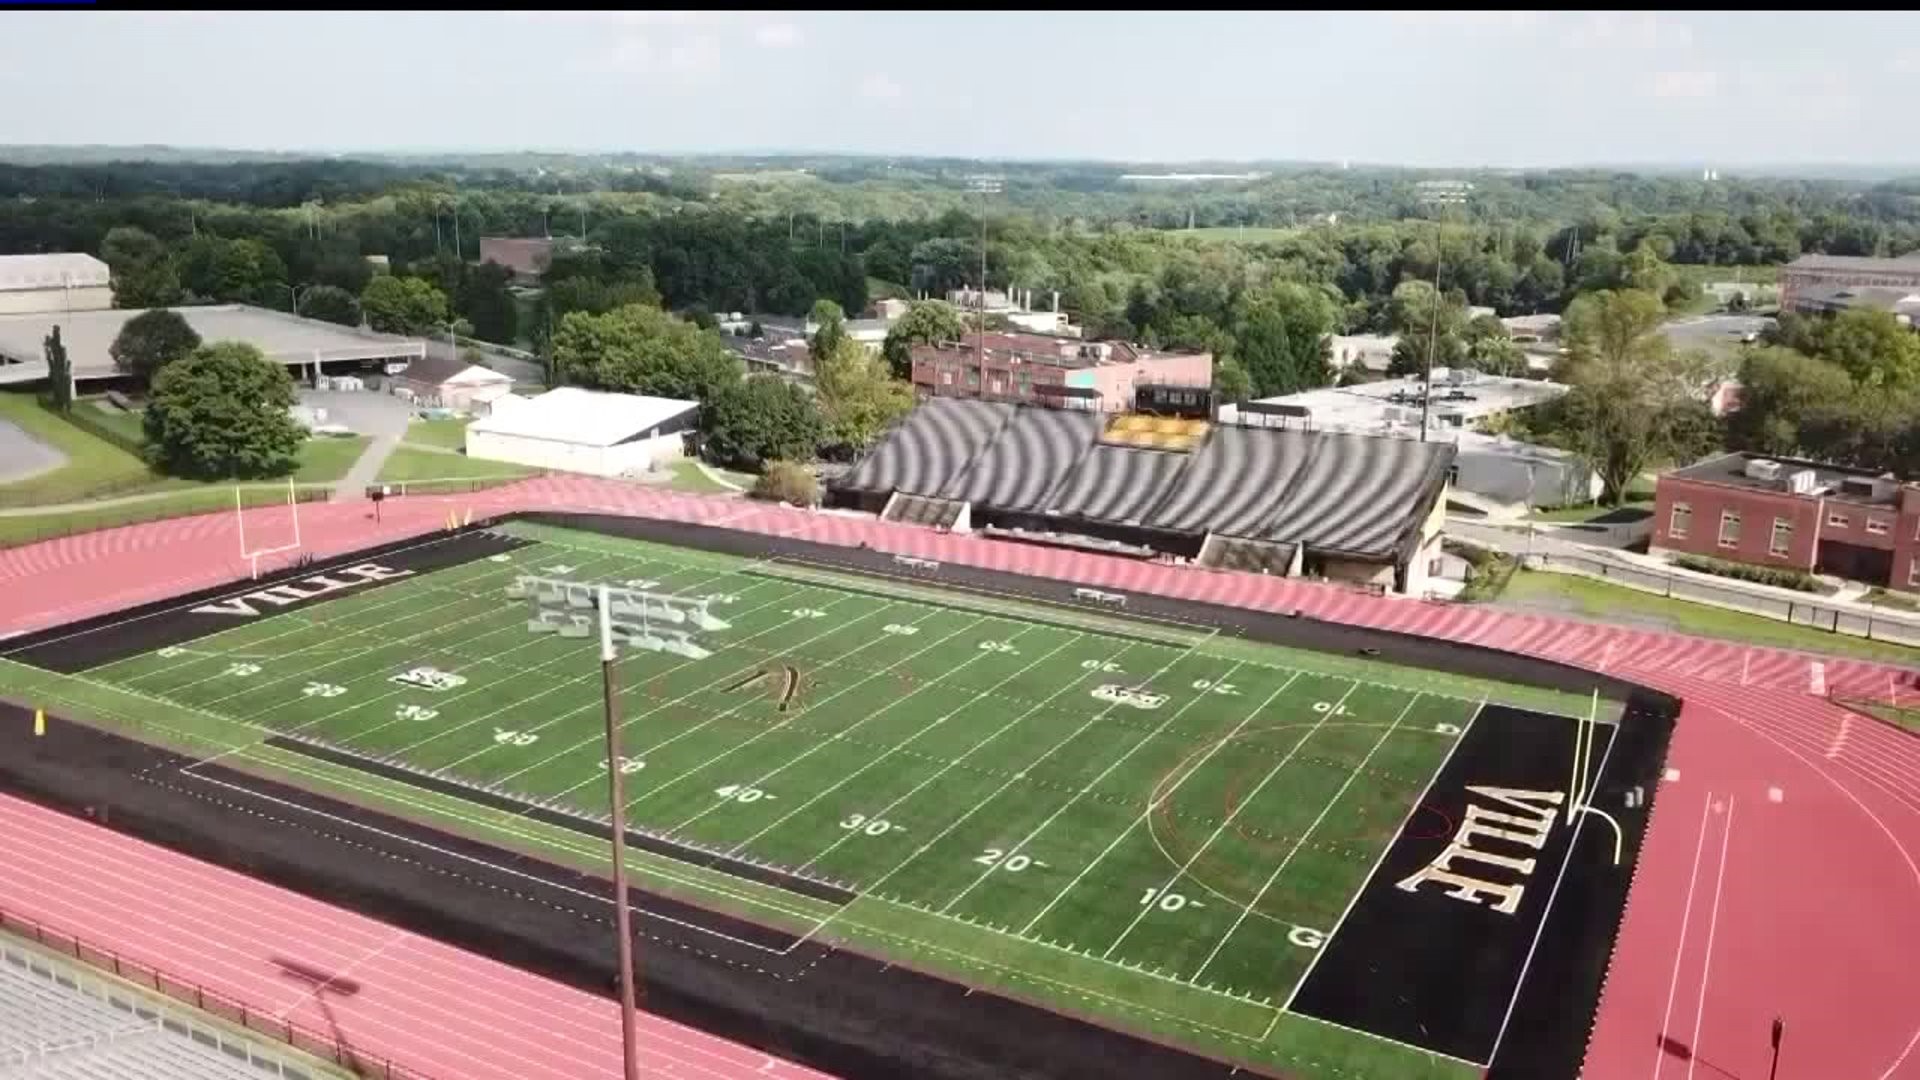 New and exciting changes on and off the field at Millersville University